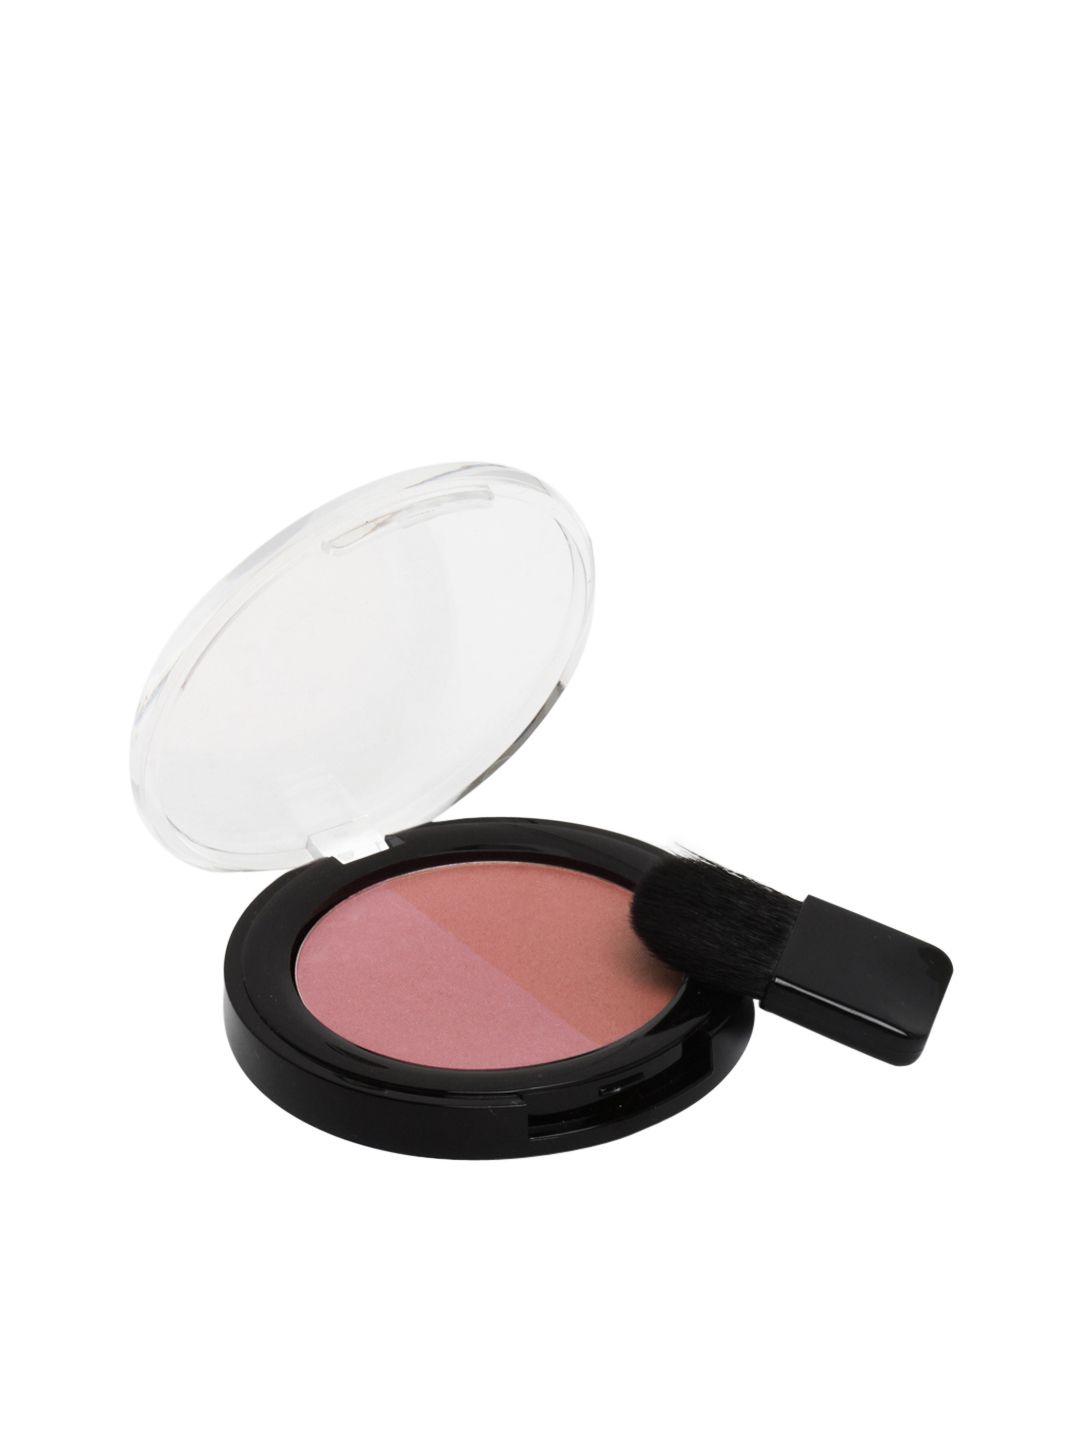 lakme absolute face stylist blush duos- pink blush